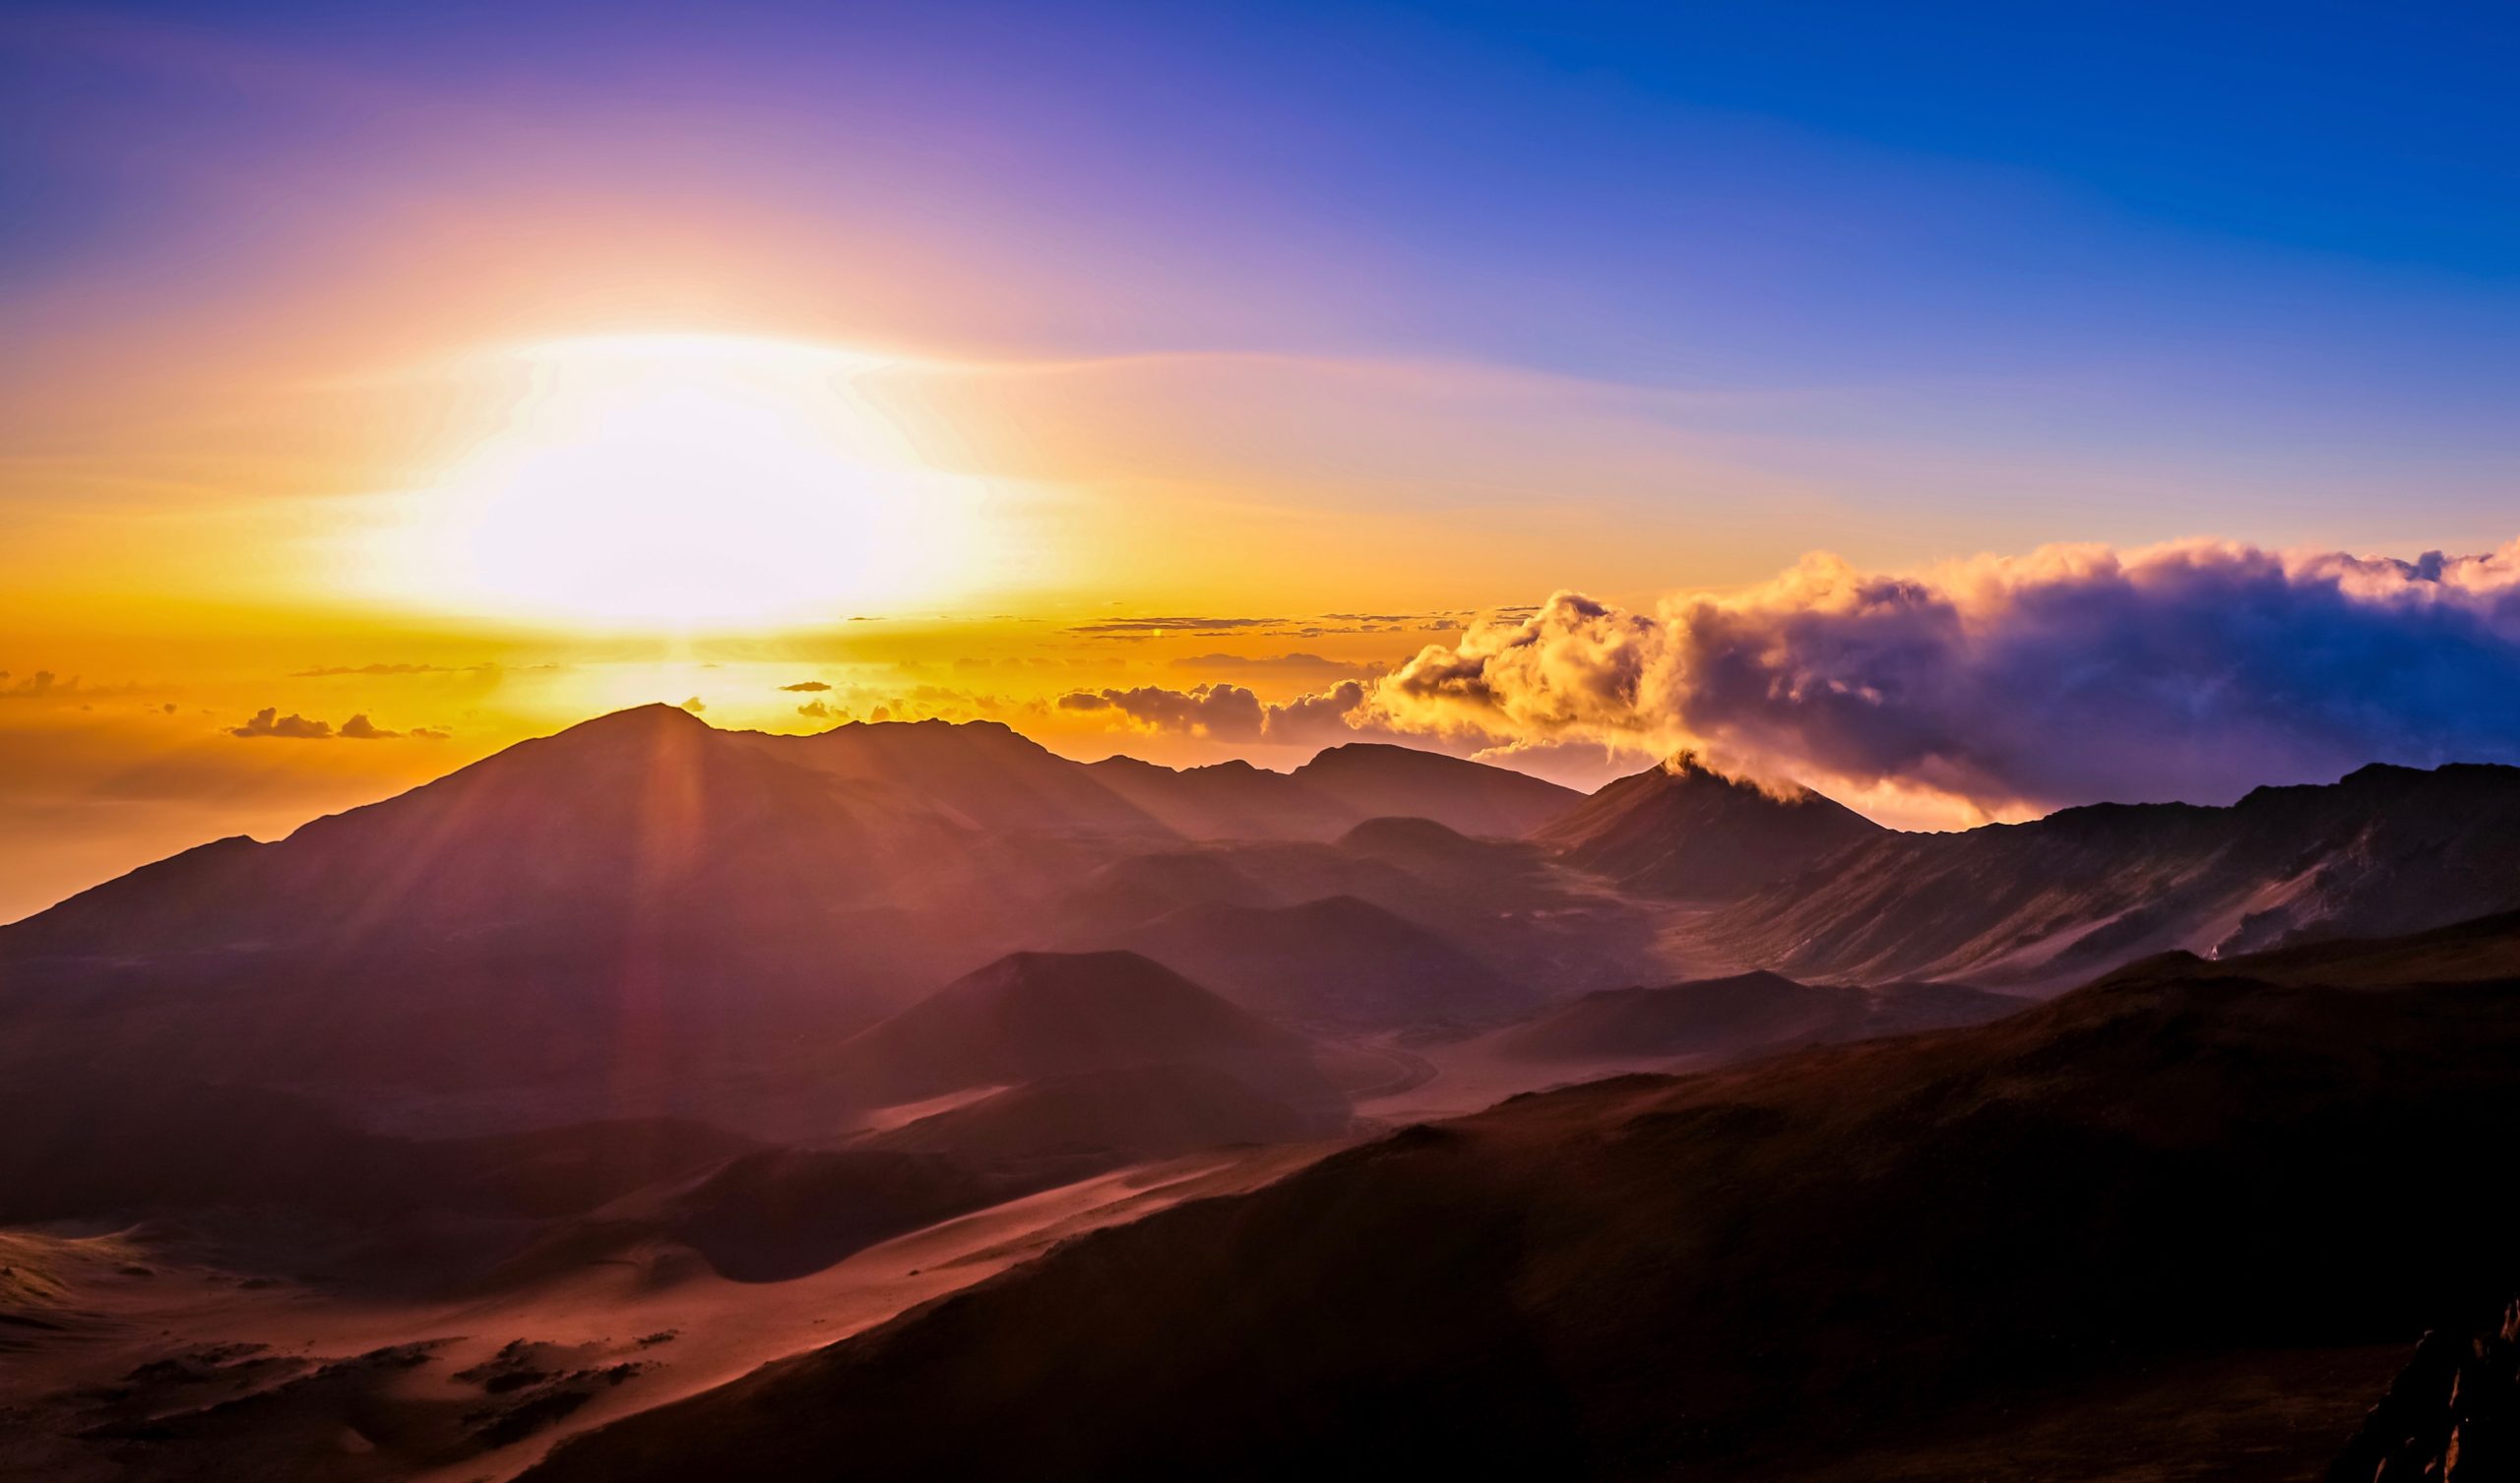 Mt. Haleakala: a once-in-a-lifetime experience